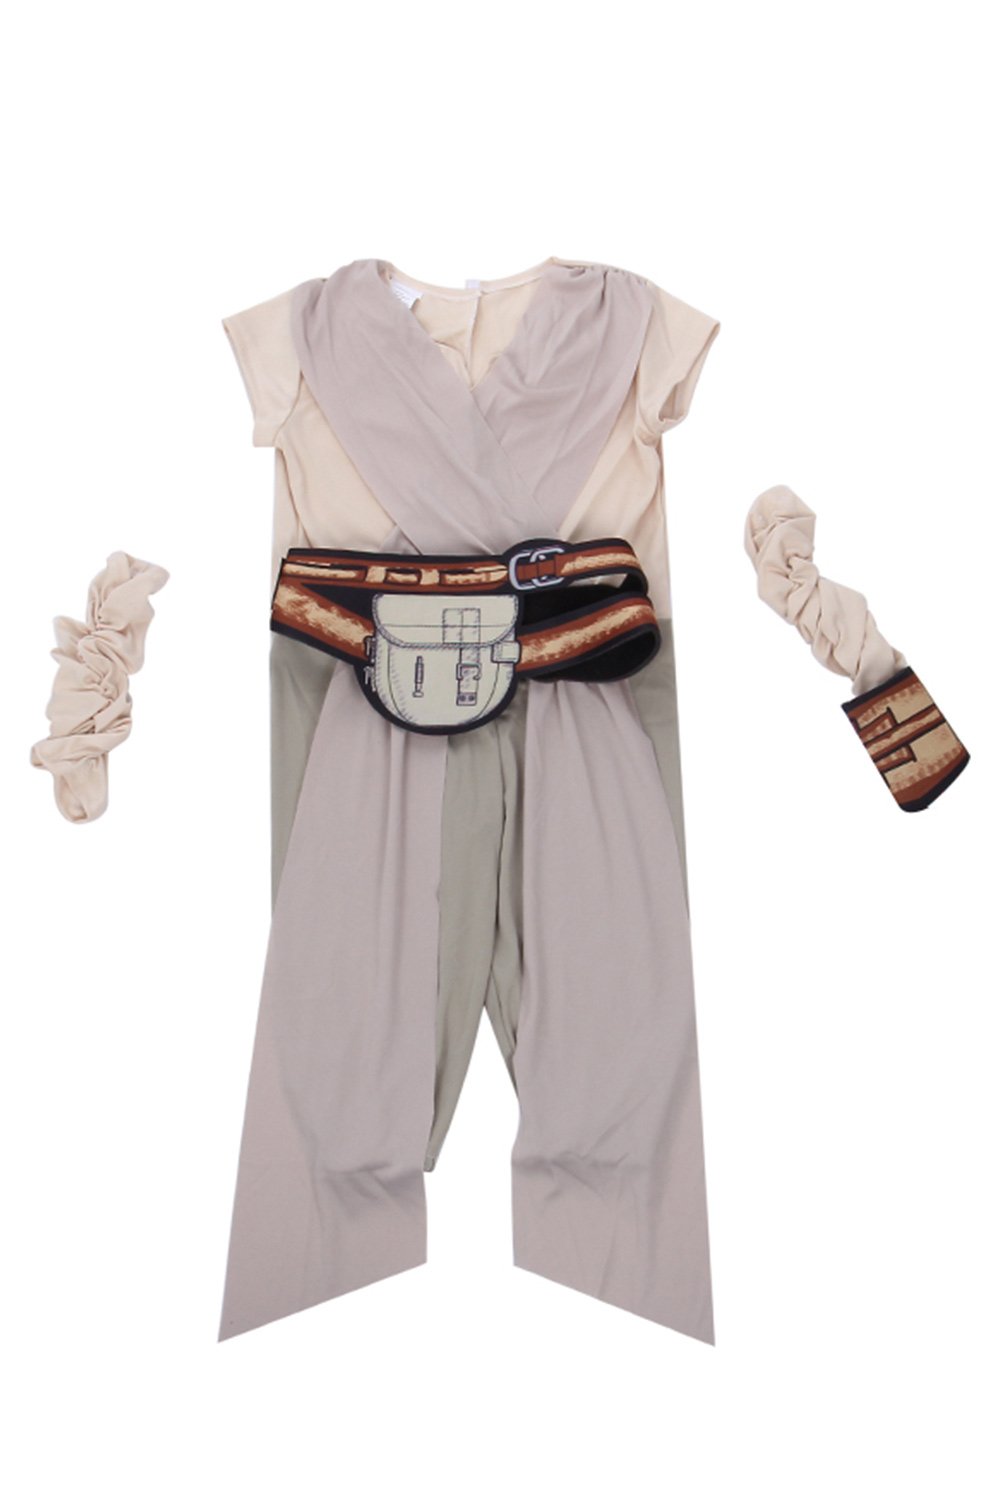 Toddler Star Wars Rey Costume Outfit For Kids Children